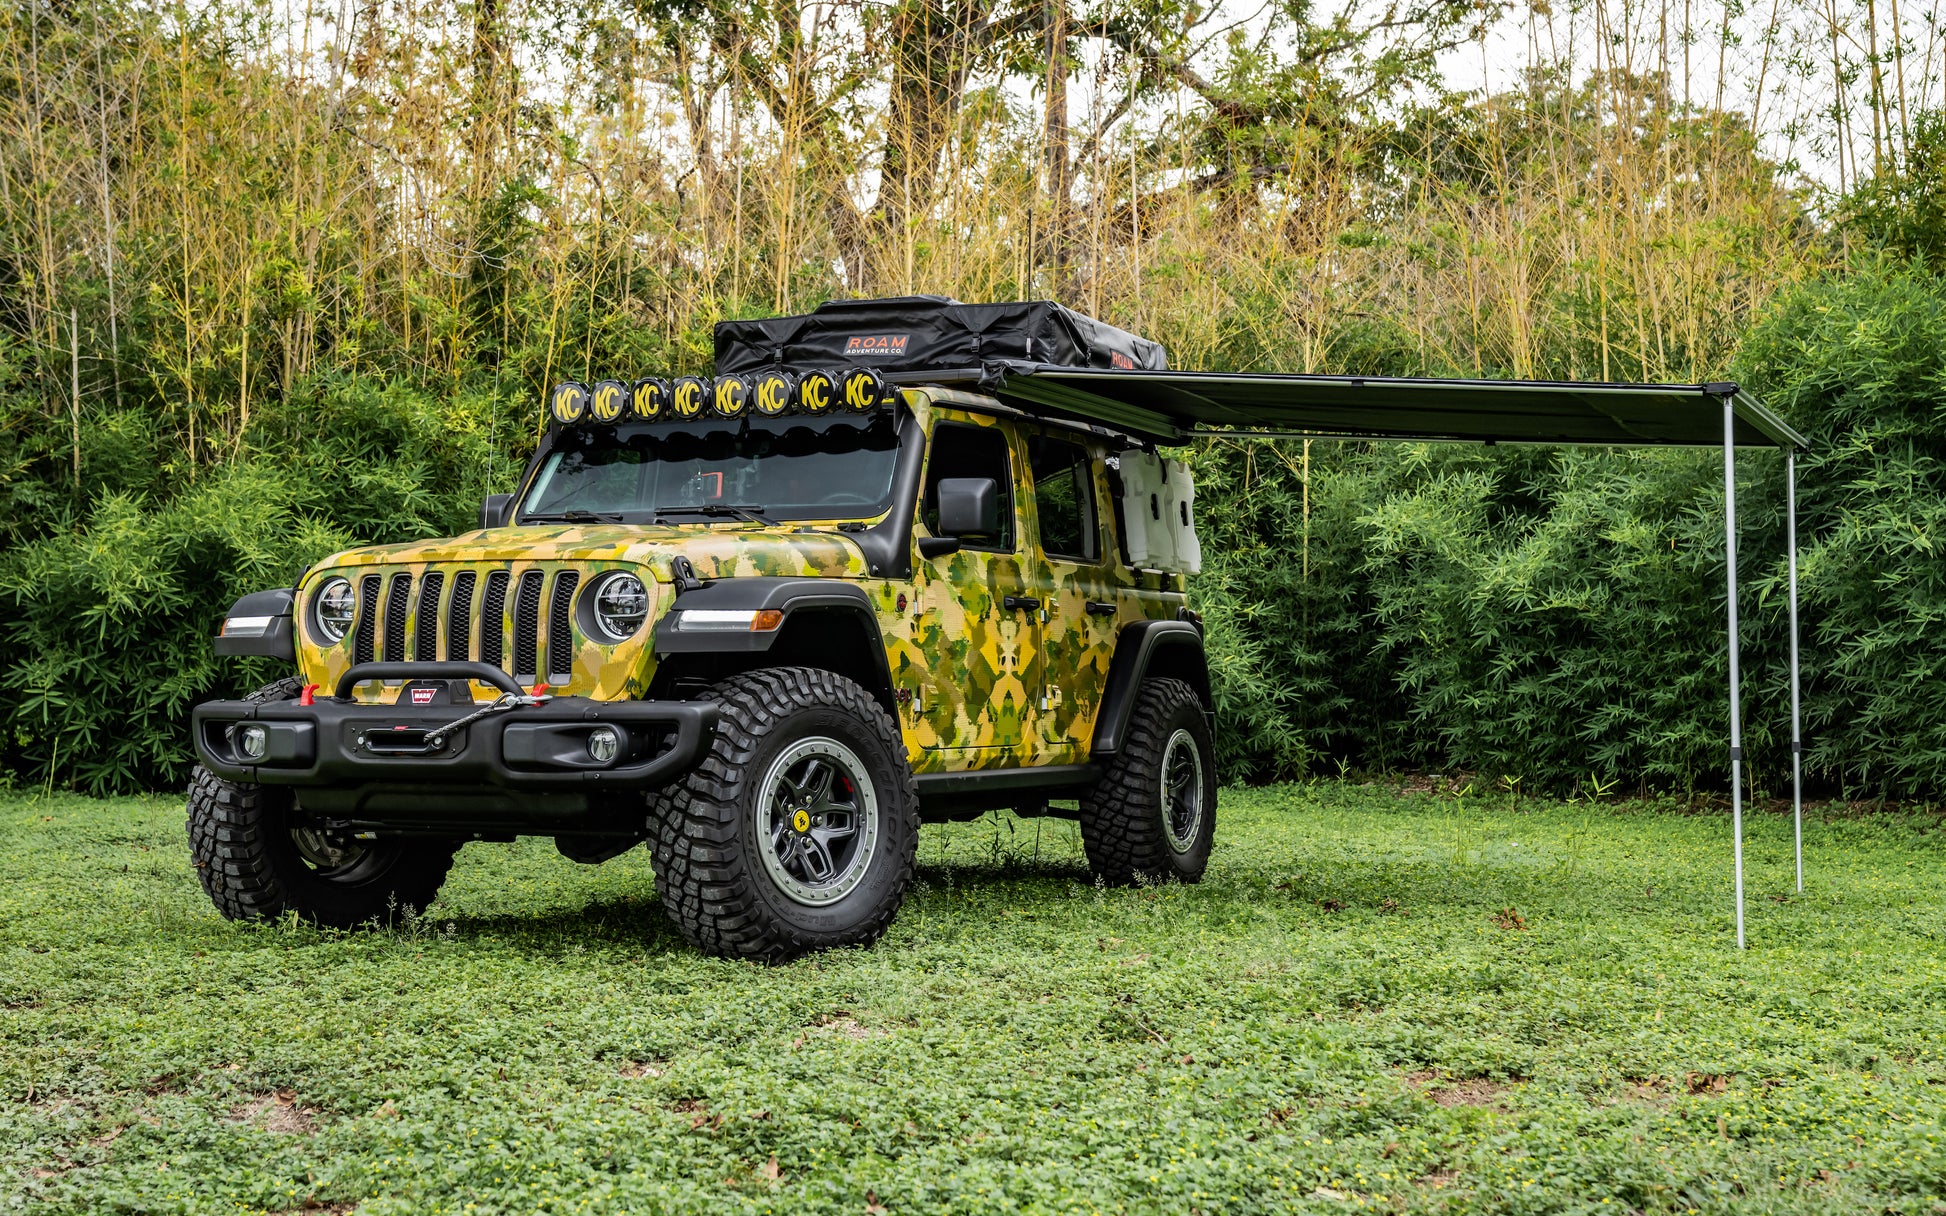 upgraded camo wrapped jeep wrangler rubicon for sale near kyle buda texas at hawkes outdoors 2102512882